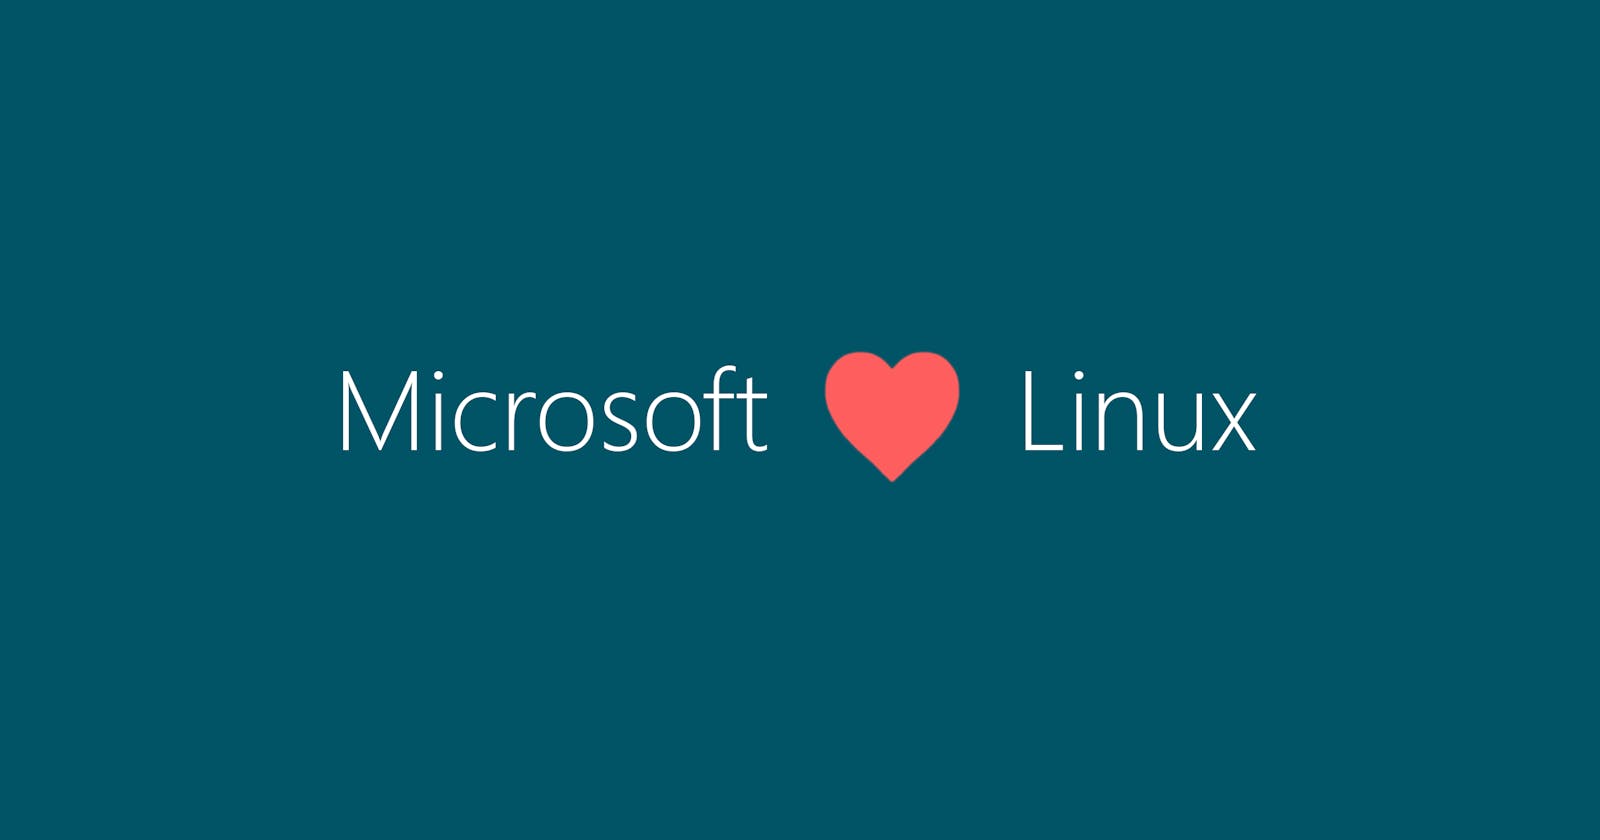 The next Windows might be a Linux distro